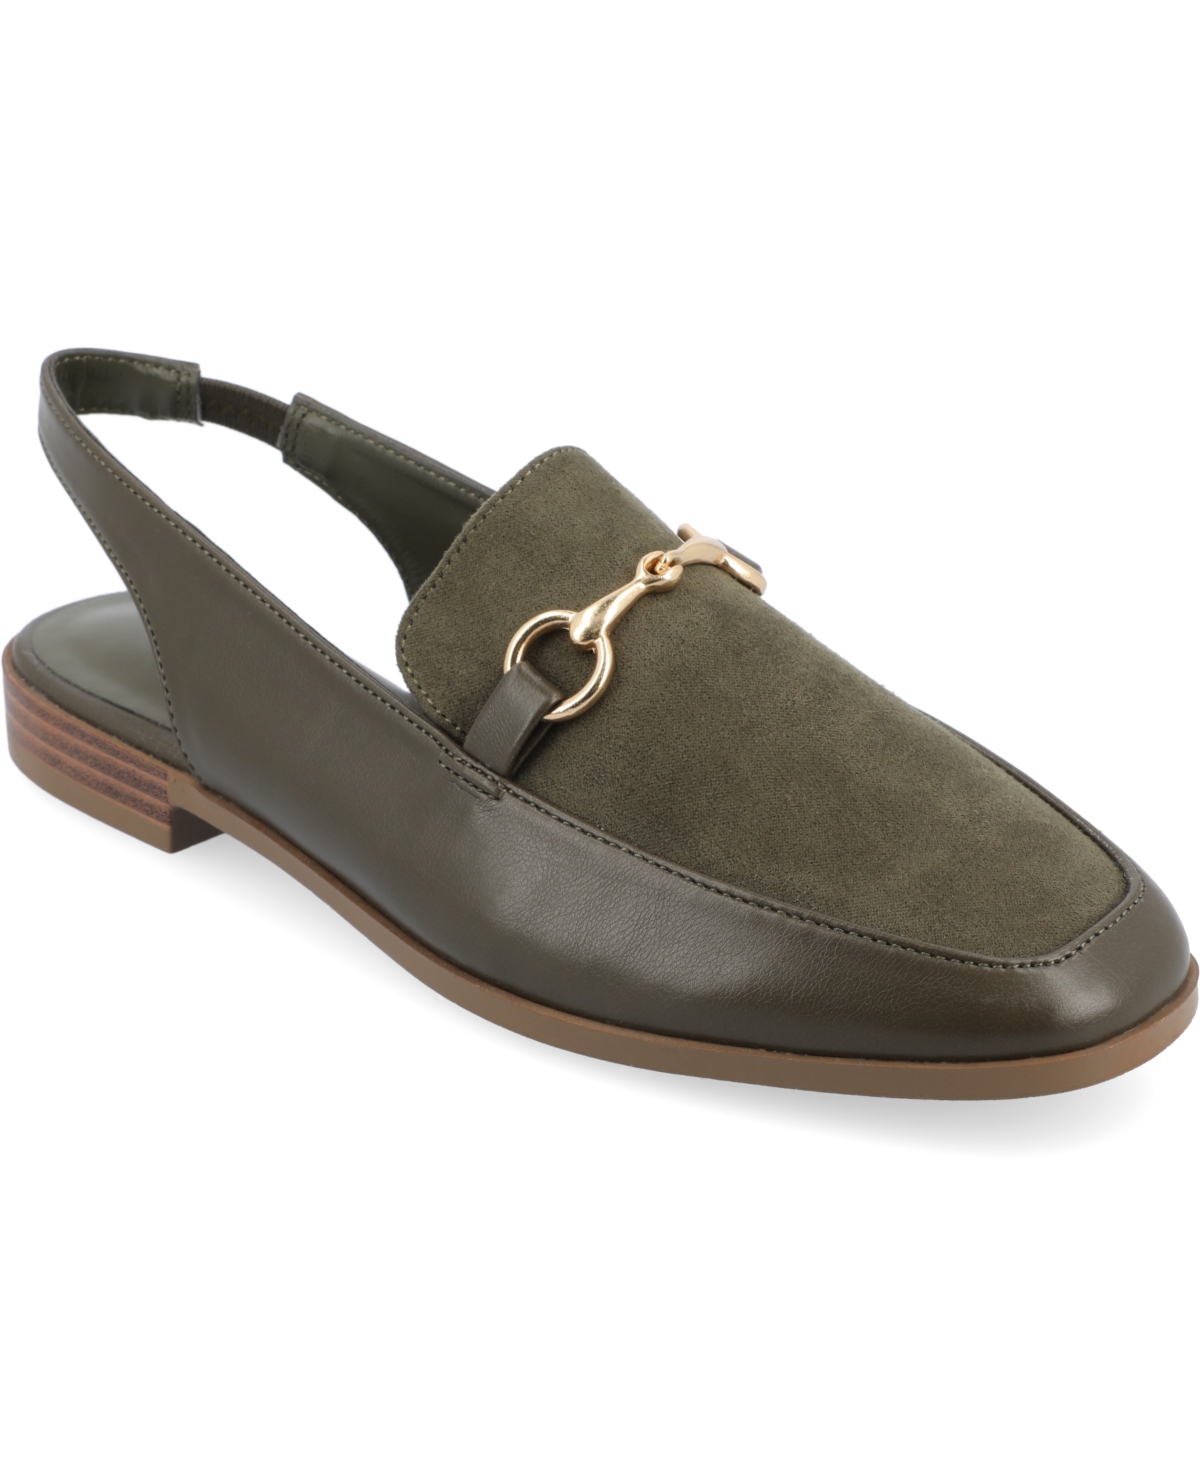 Women's Lainey Bit Sling Back Loafers - Taupe